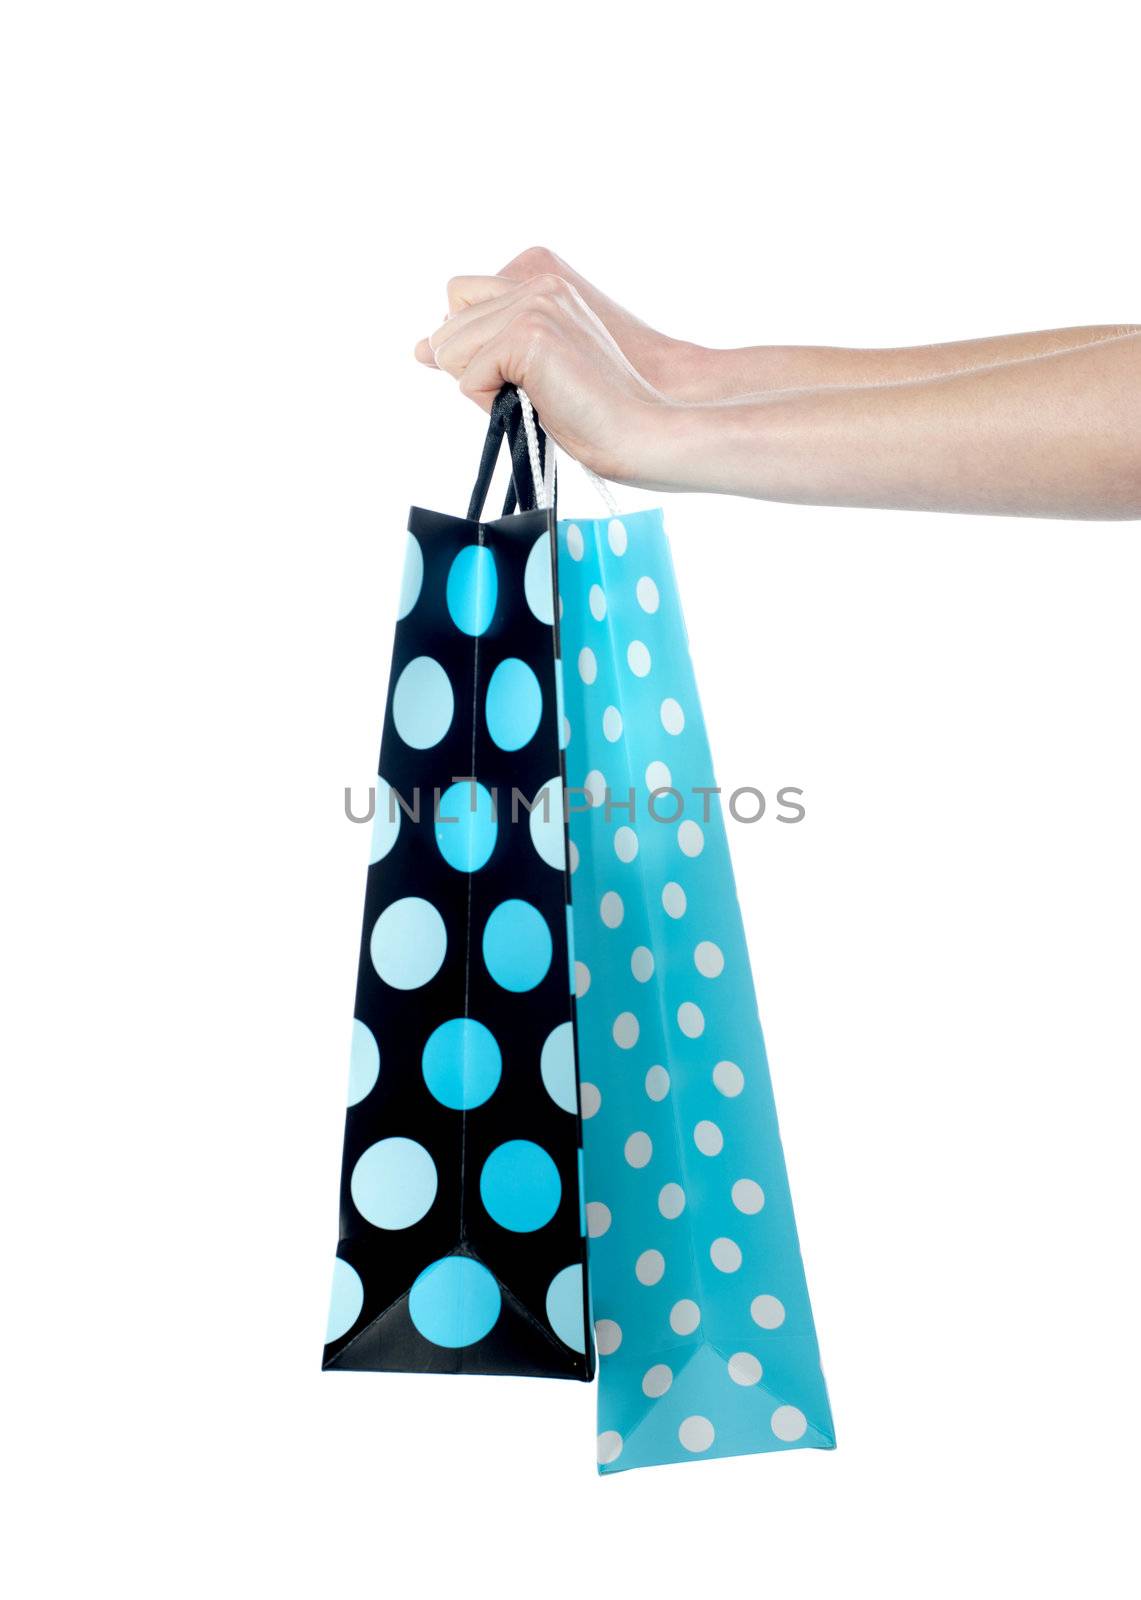 Female hand holding shopping bags by stockyimages